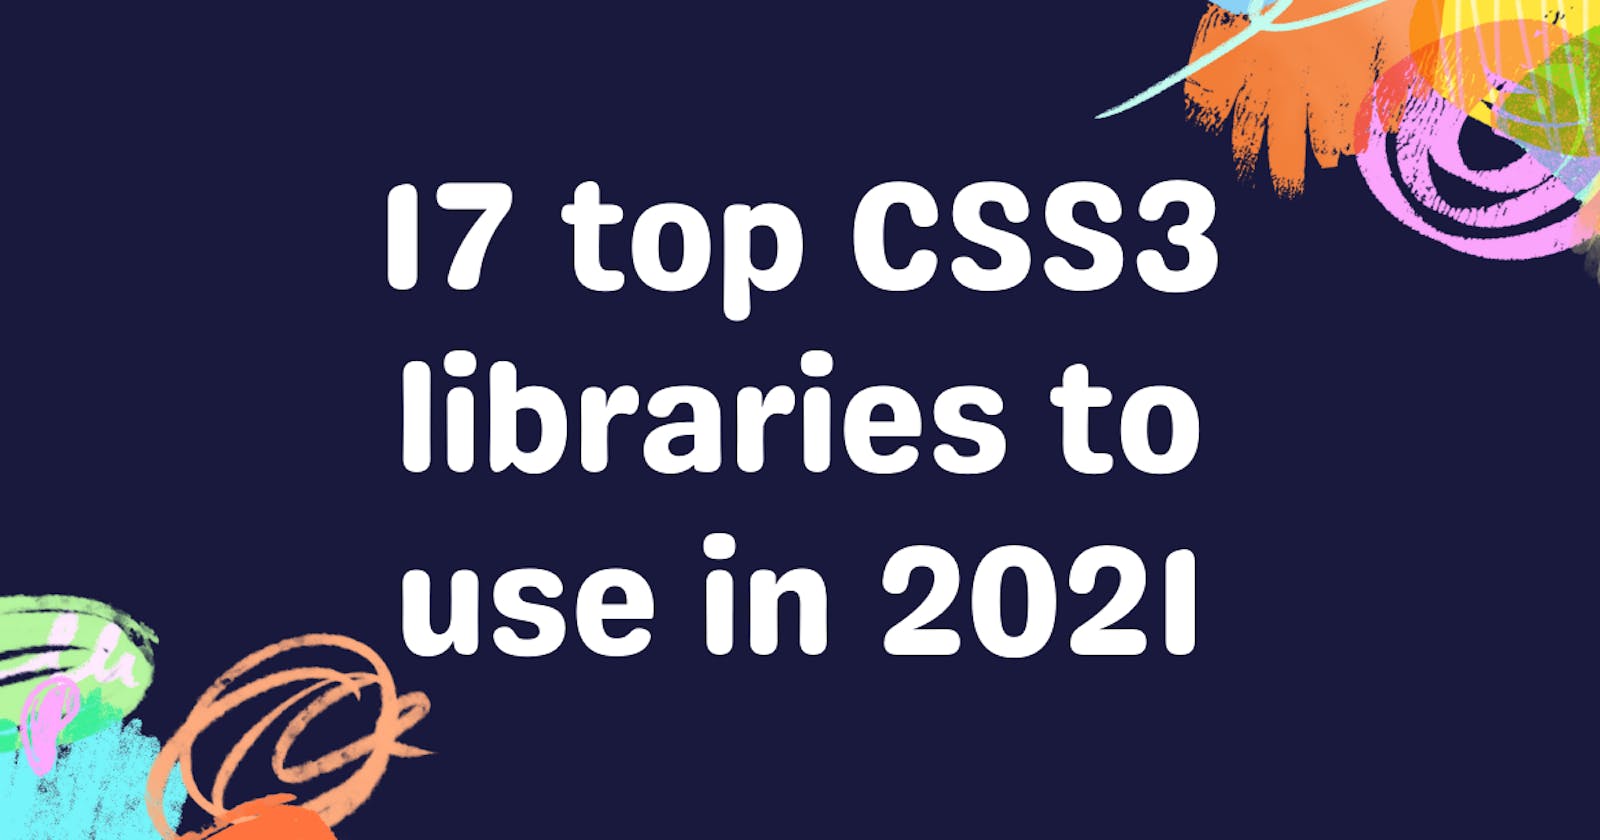 17 Top CSS3 libraries to use in 2021